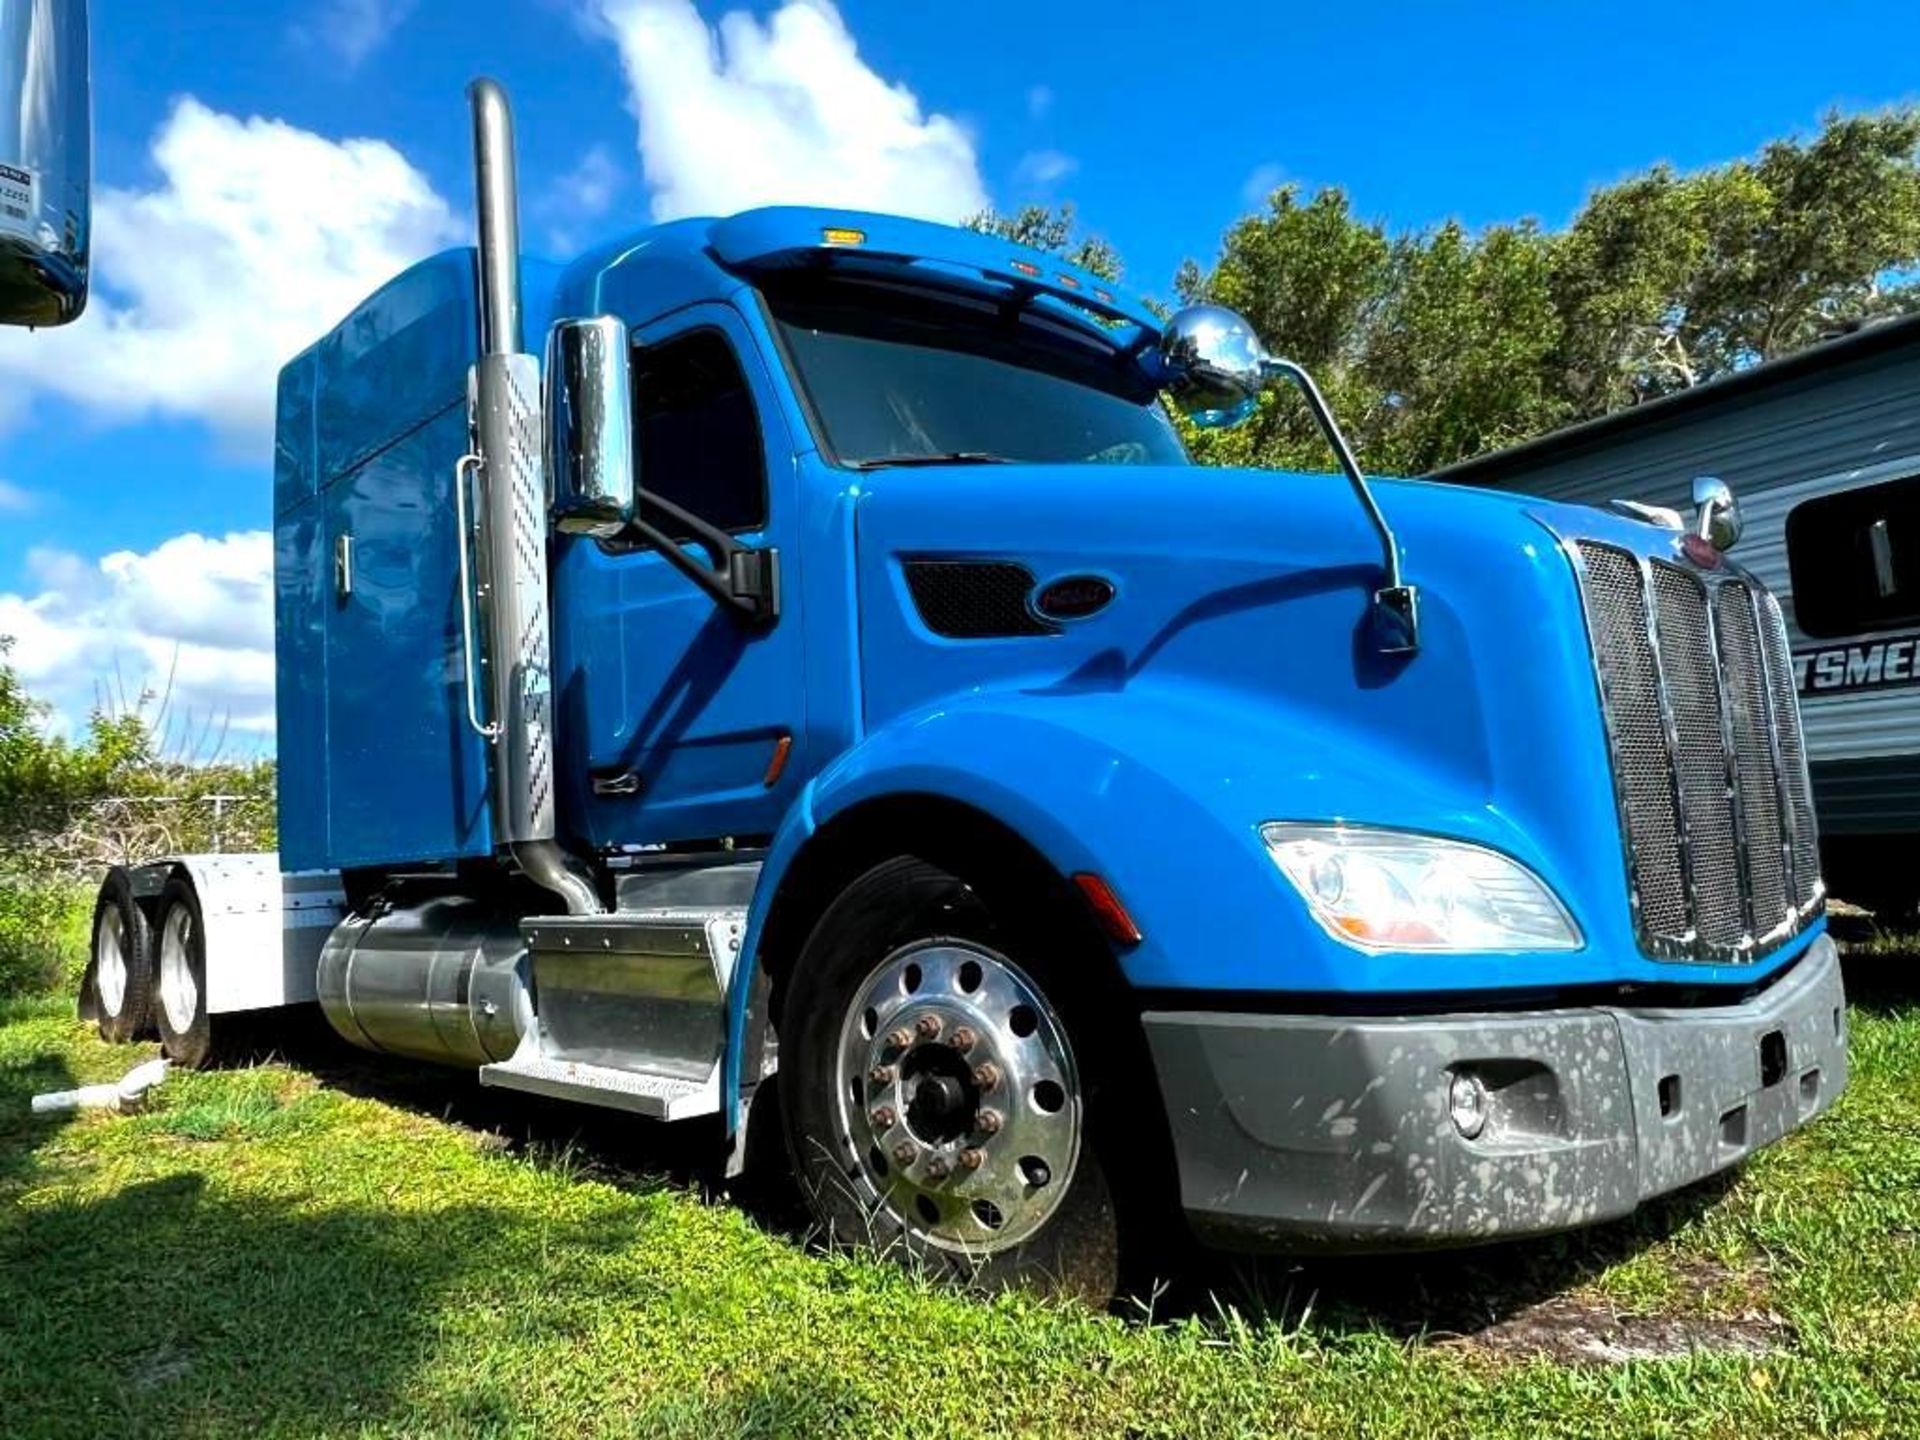 2014 PETERBILT 579 SEMI TRUCK W/SLEEPER CAB, PACCAR DIESEL ENGINE, 455 HP, AUTOMATIC TRANSMISSION - Image 5 of 34